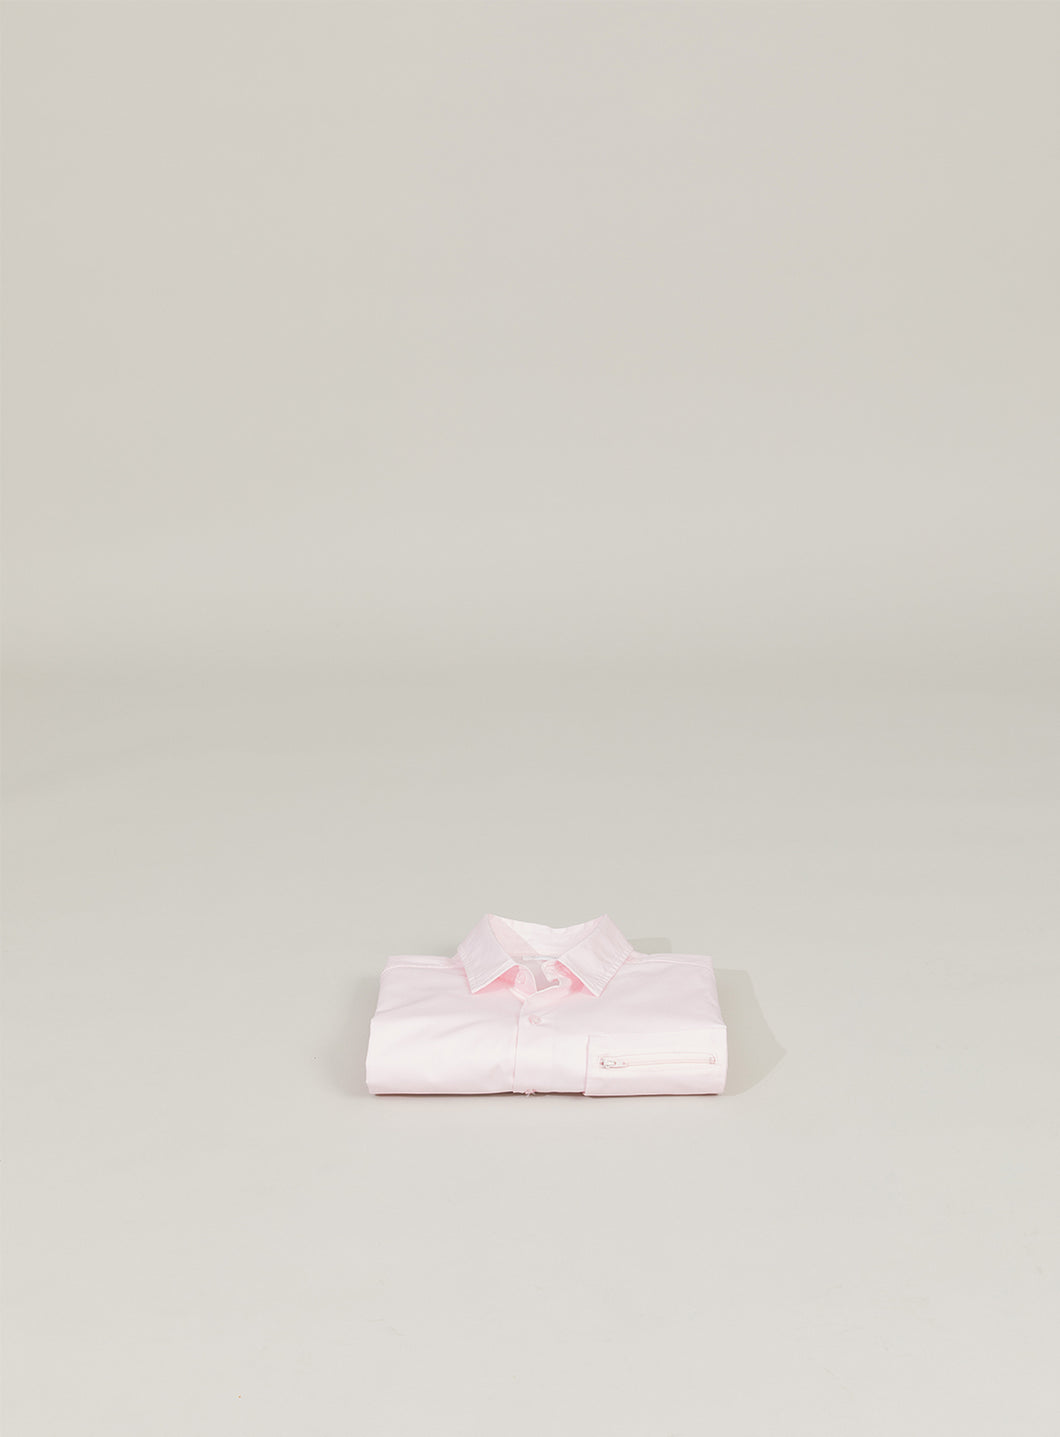 Shirt with Puffed Chest Pocket in Pale Pink Poplin